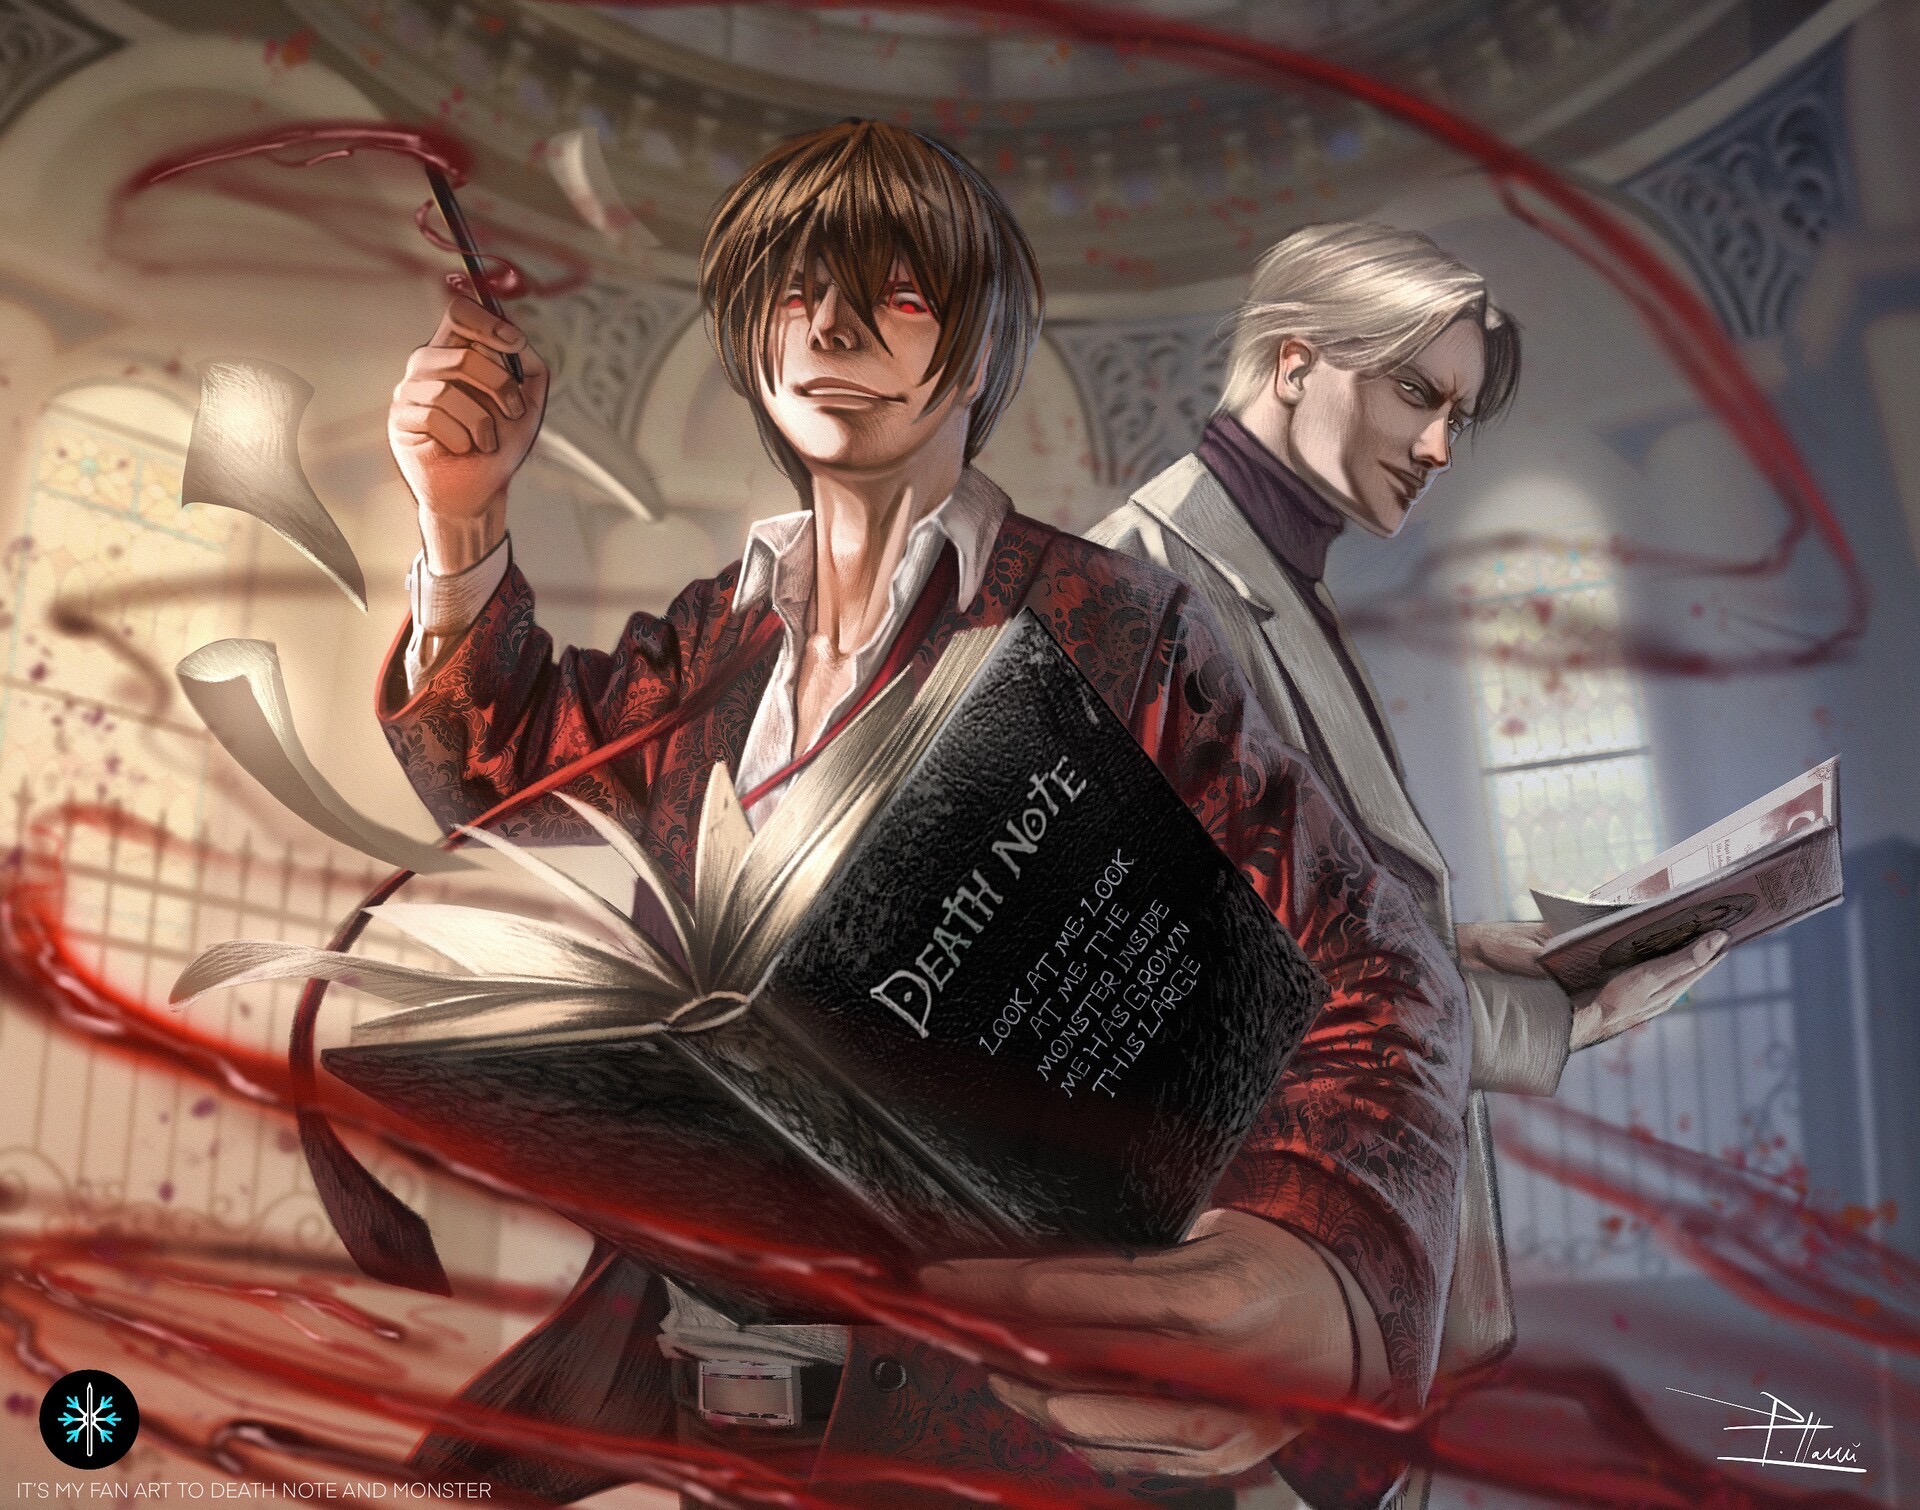 Death Note and Monster by romanintelligent666 on DeviantArt